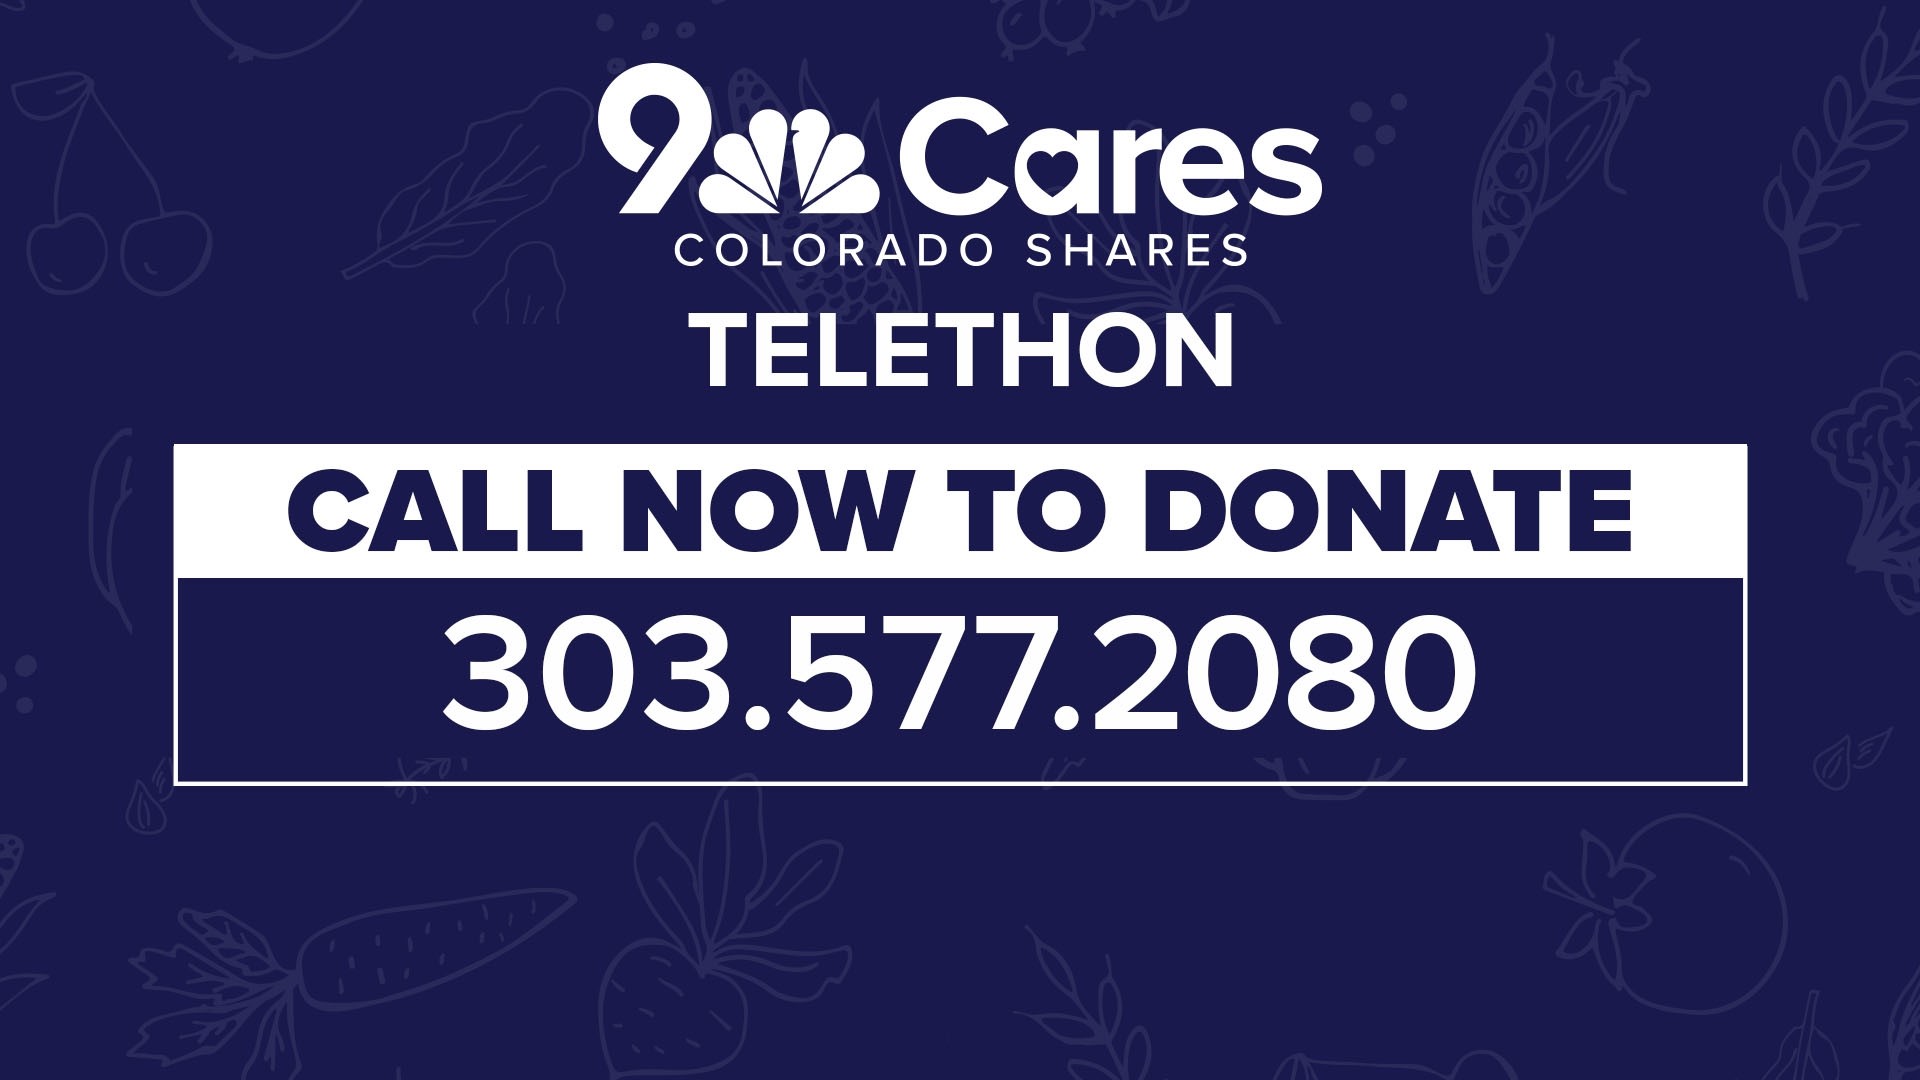 The 2nd annual 9Cares Colorado Shares Telethon at 9NEWS will be held  through 10:30 p.m. Thursday.